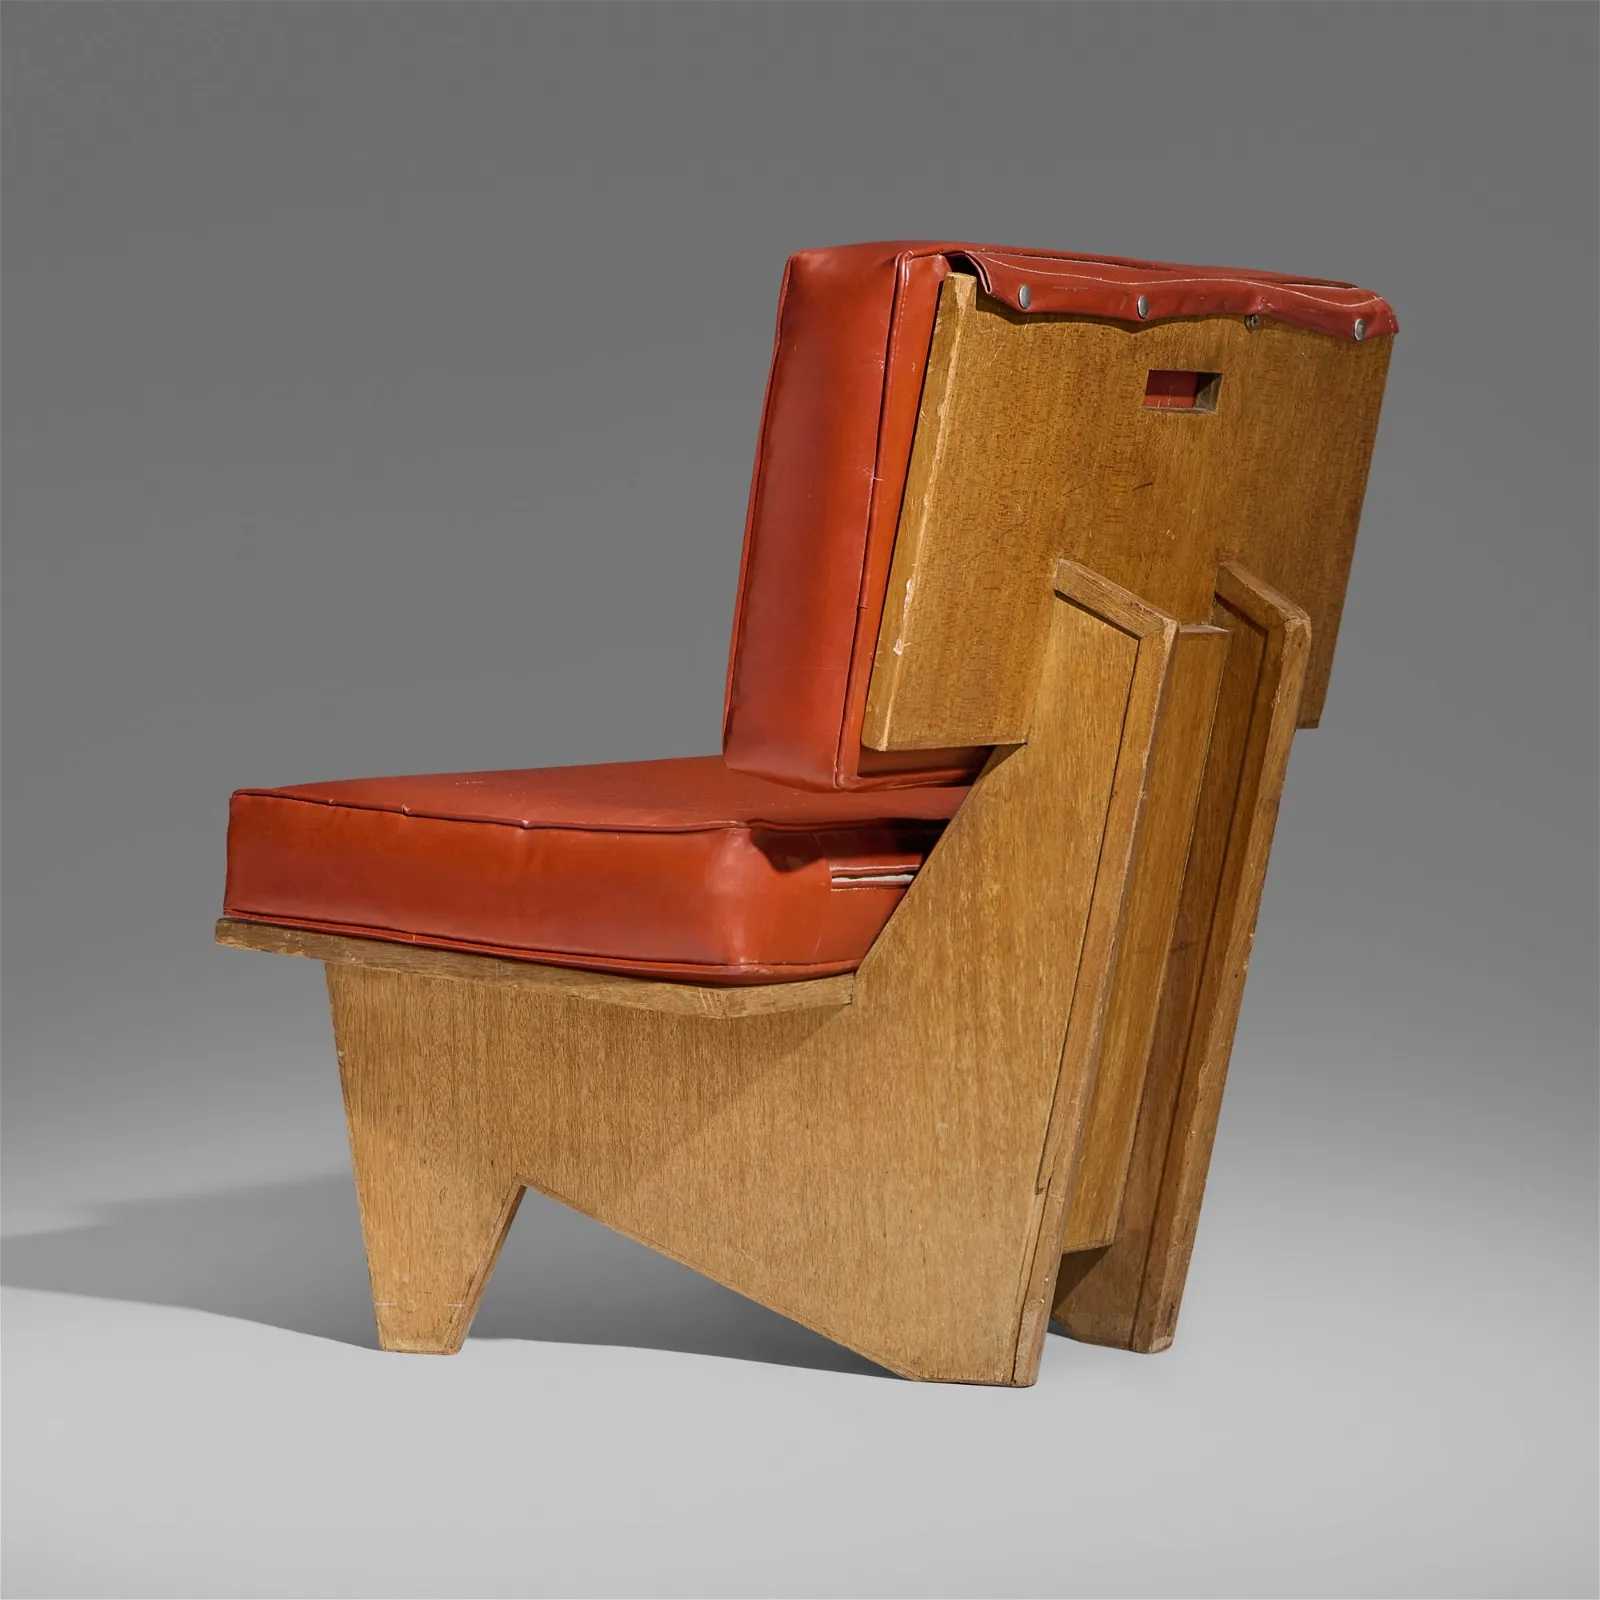 Frank Lloyd Wright chair claimed $52K in spectacular overperformance at Toomey